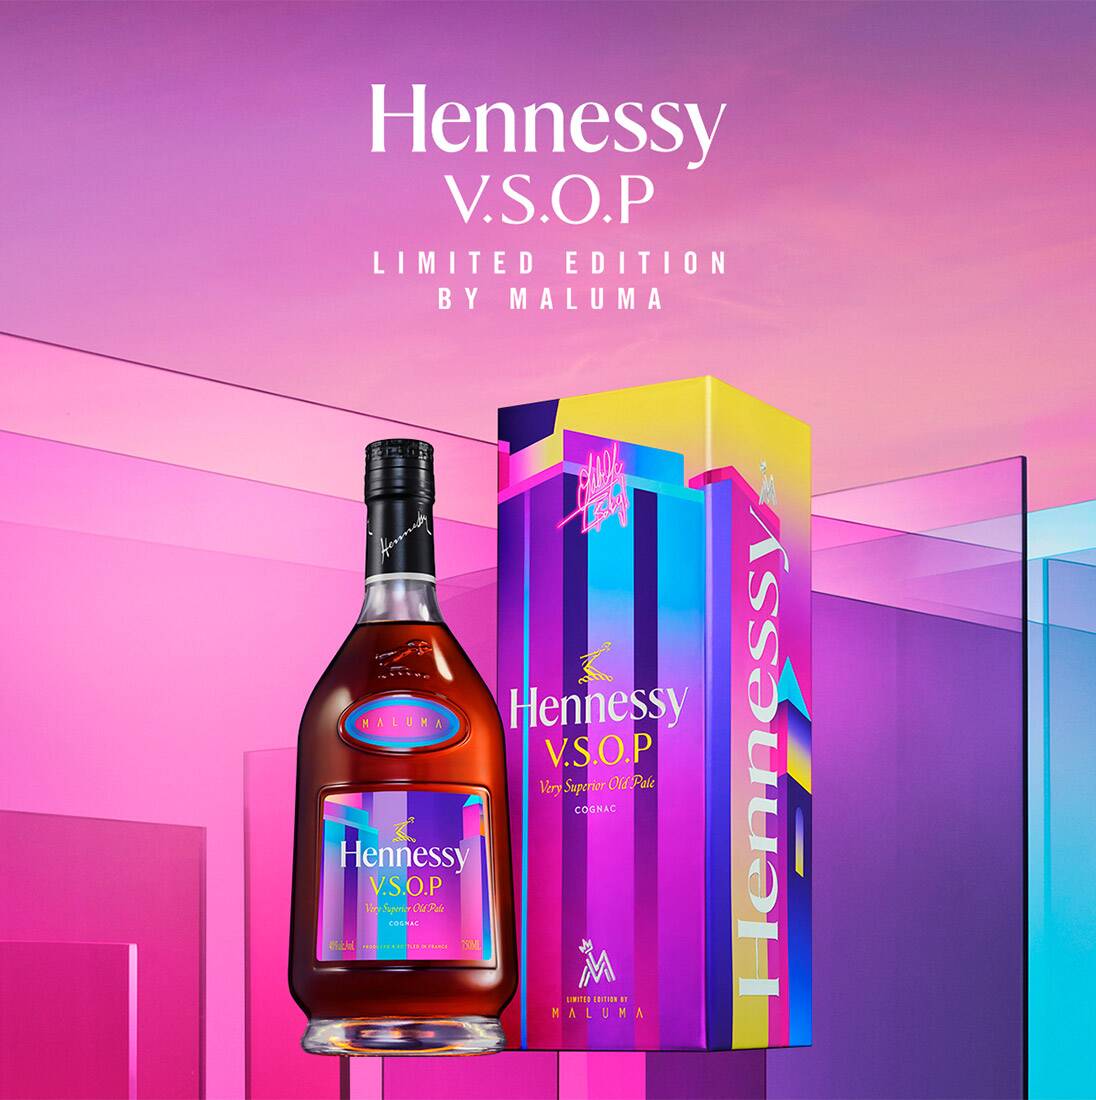 Moet Hennessy, Brands of the World™